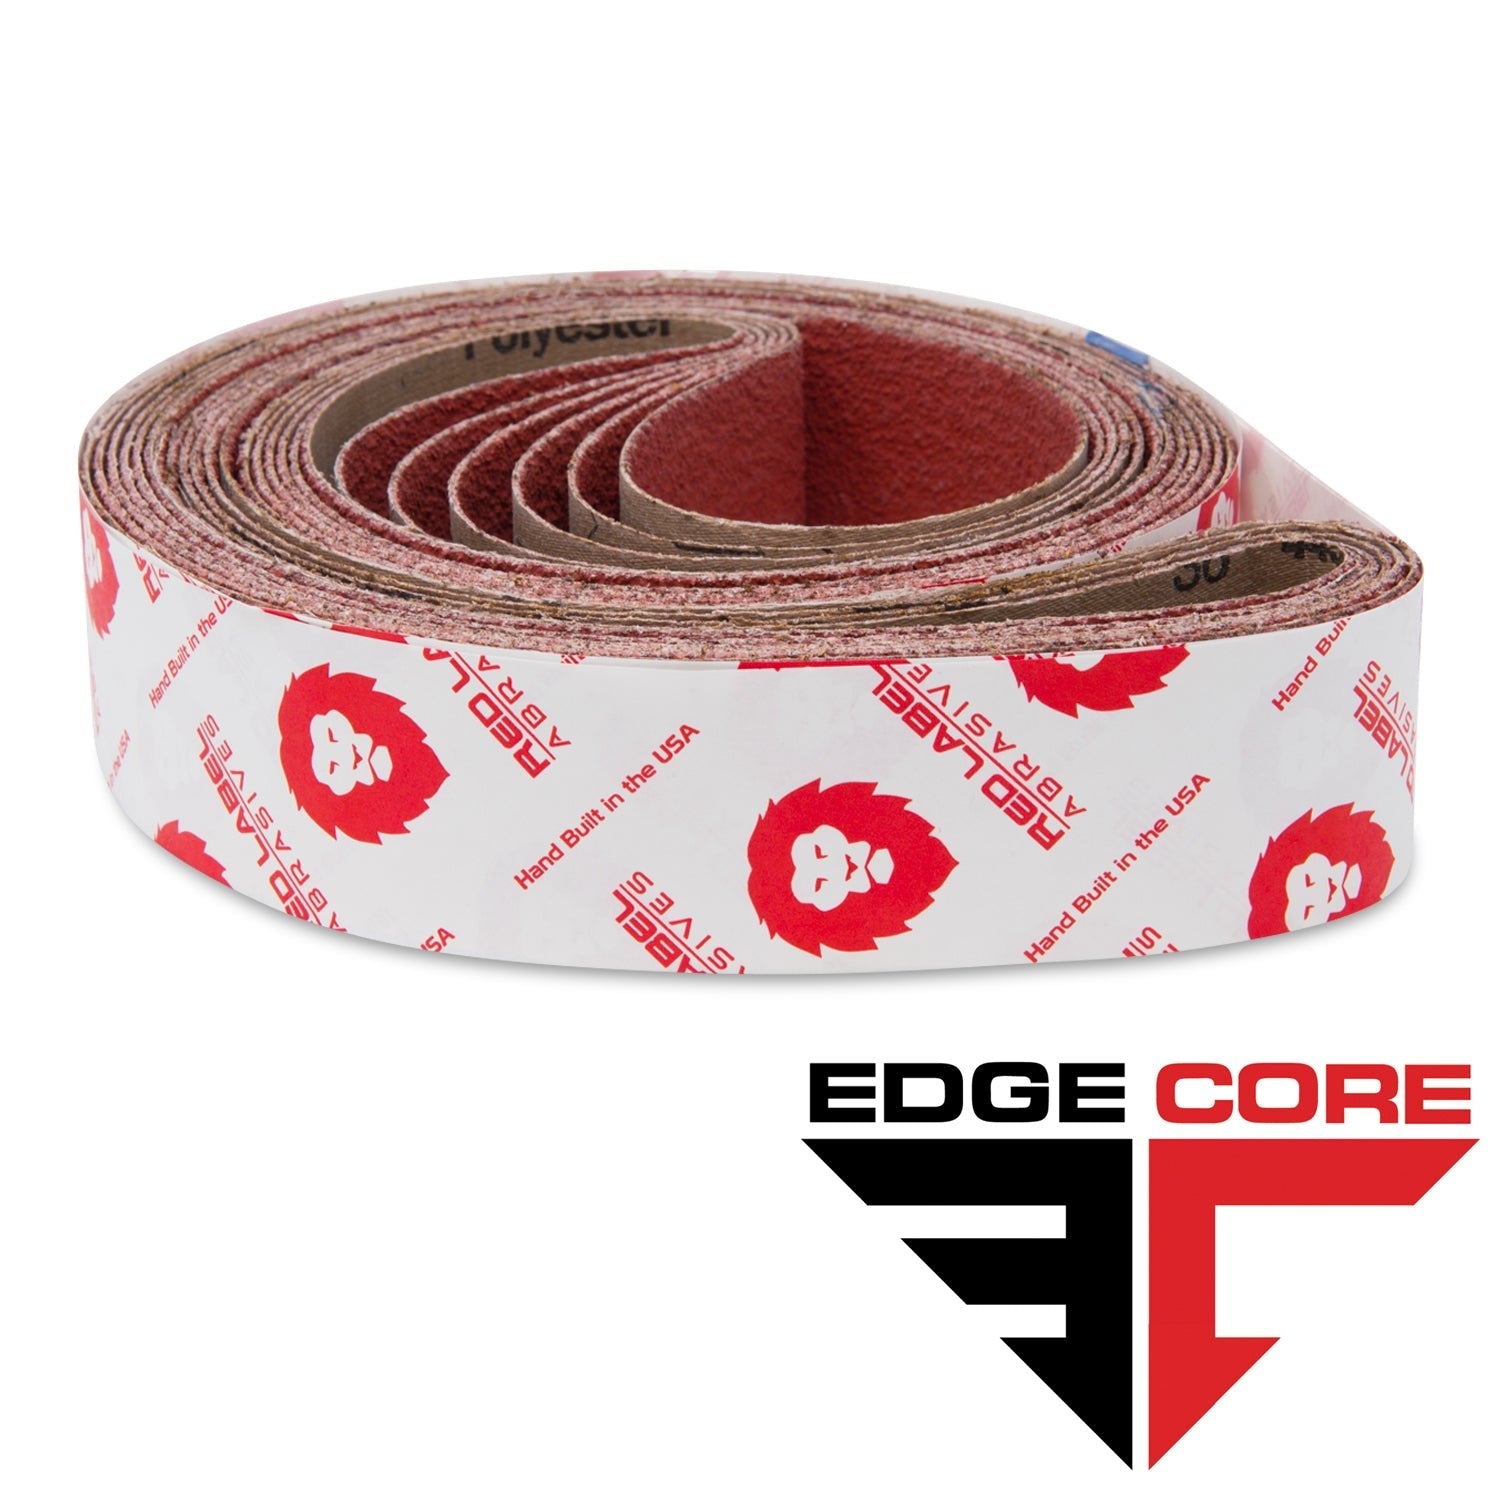 2 X 48 Inch EdgeCore Ceramic Grinding Belts, 6 Pack - Red Label